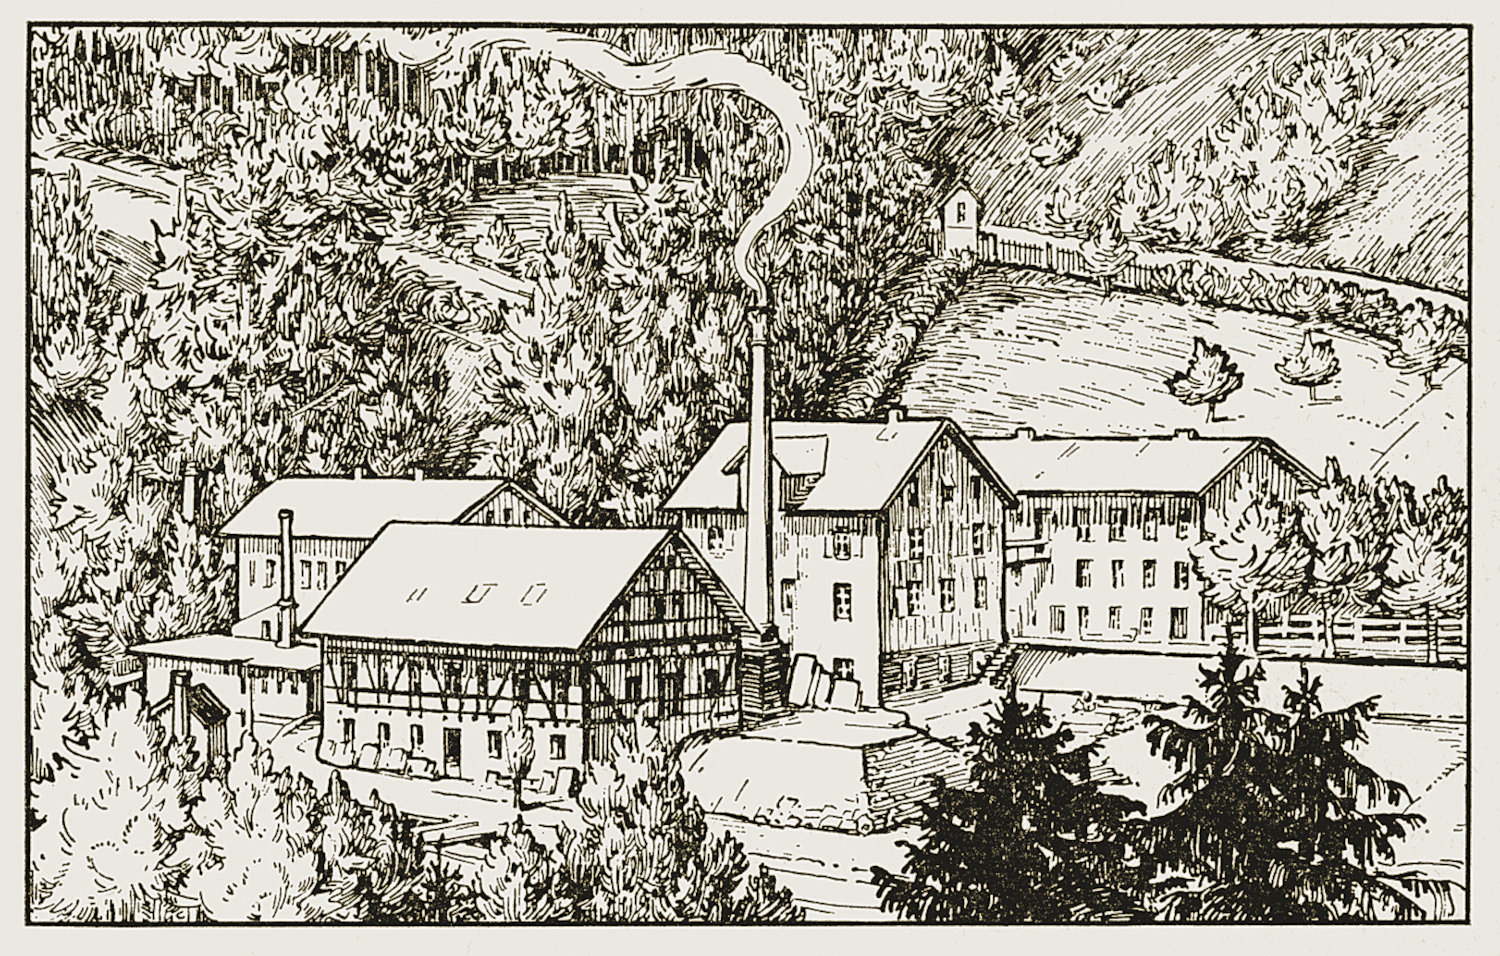 1866 - Junghans Company Site in Schramberg, Germany